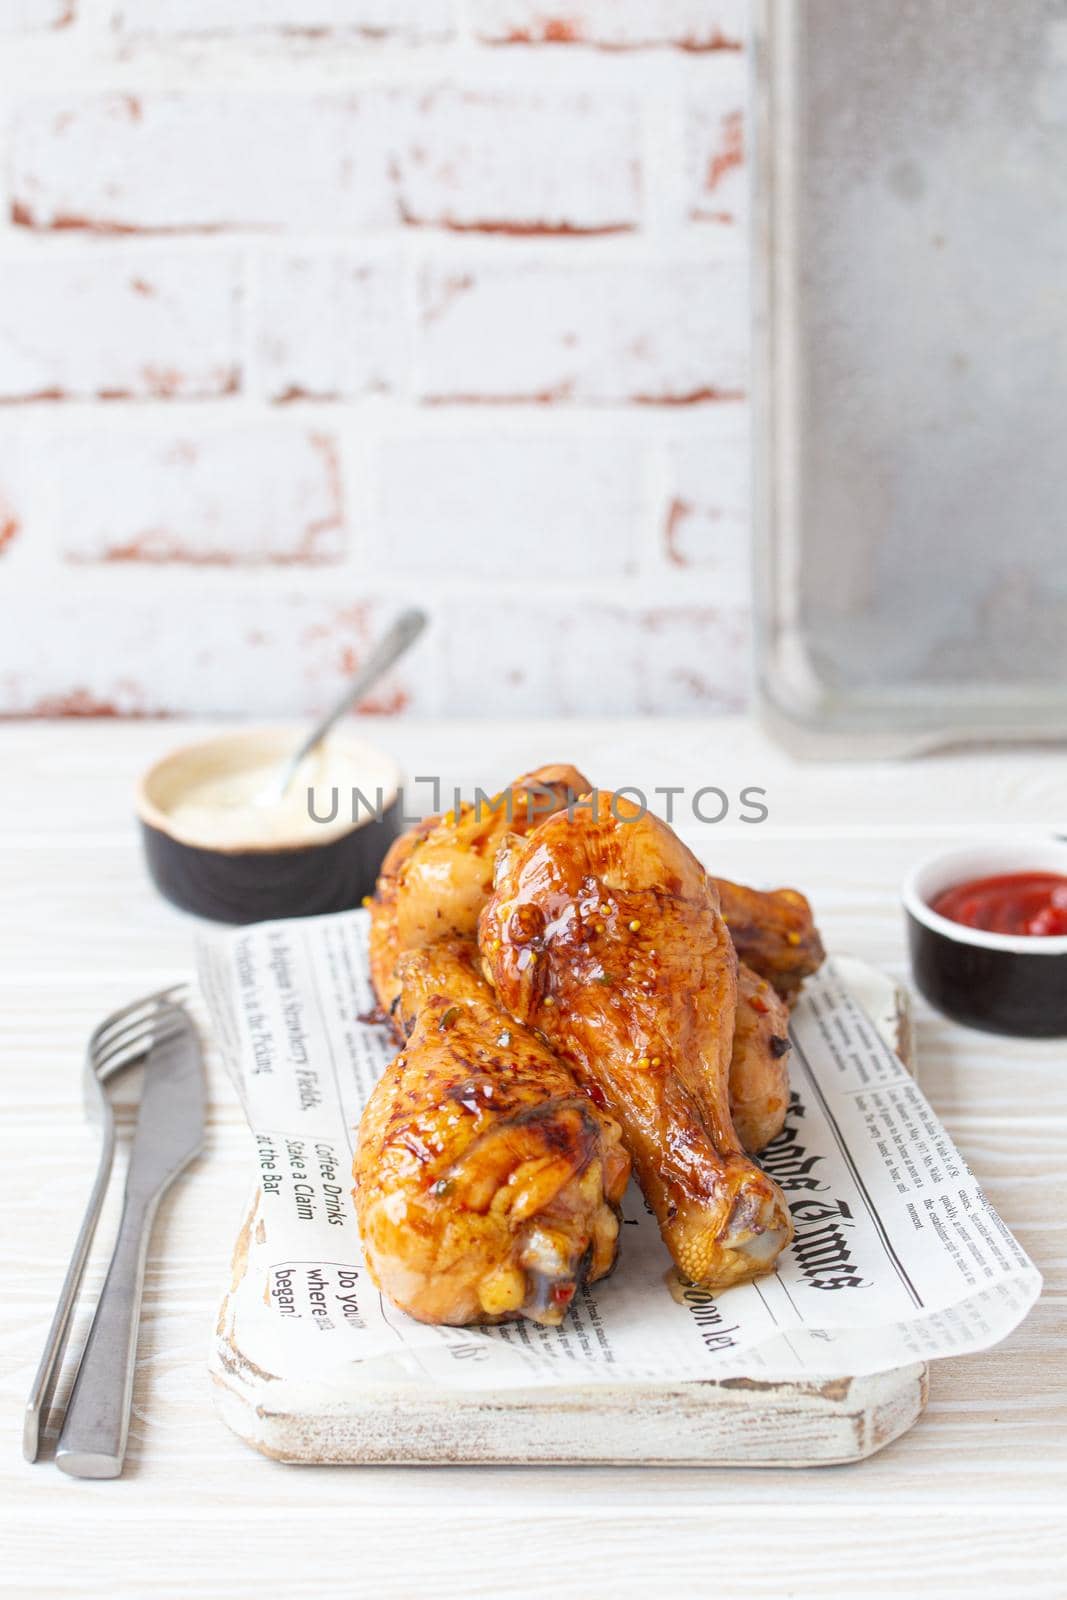 Roasted chicken legs drumsticks on wooden board with newspaper sheet served with ketchup and mayonnaise on rustic white wooden table, angle view